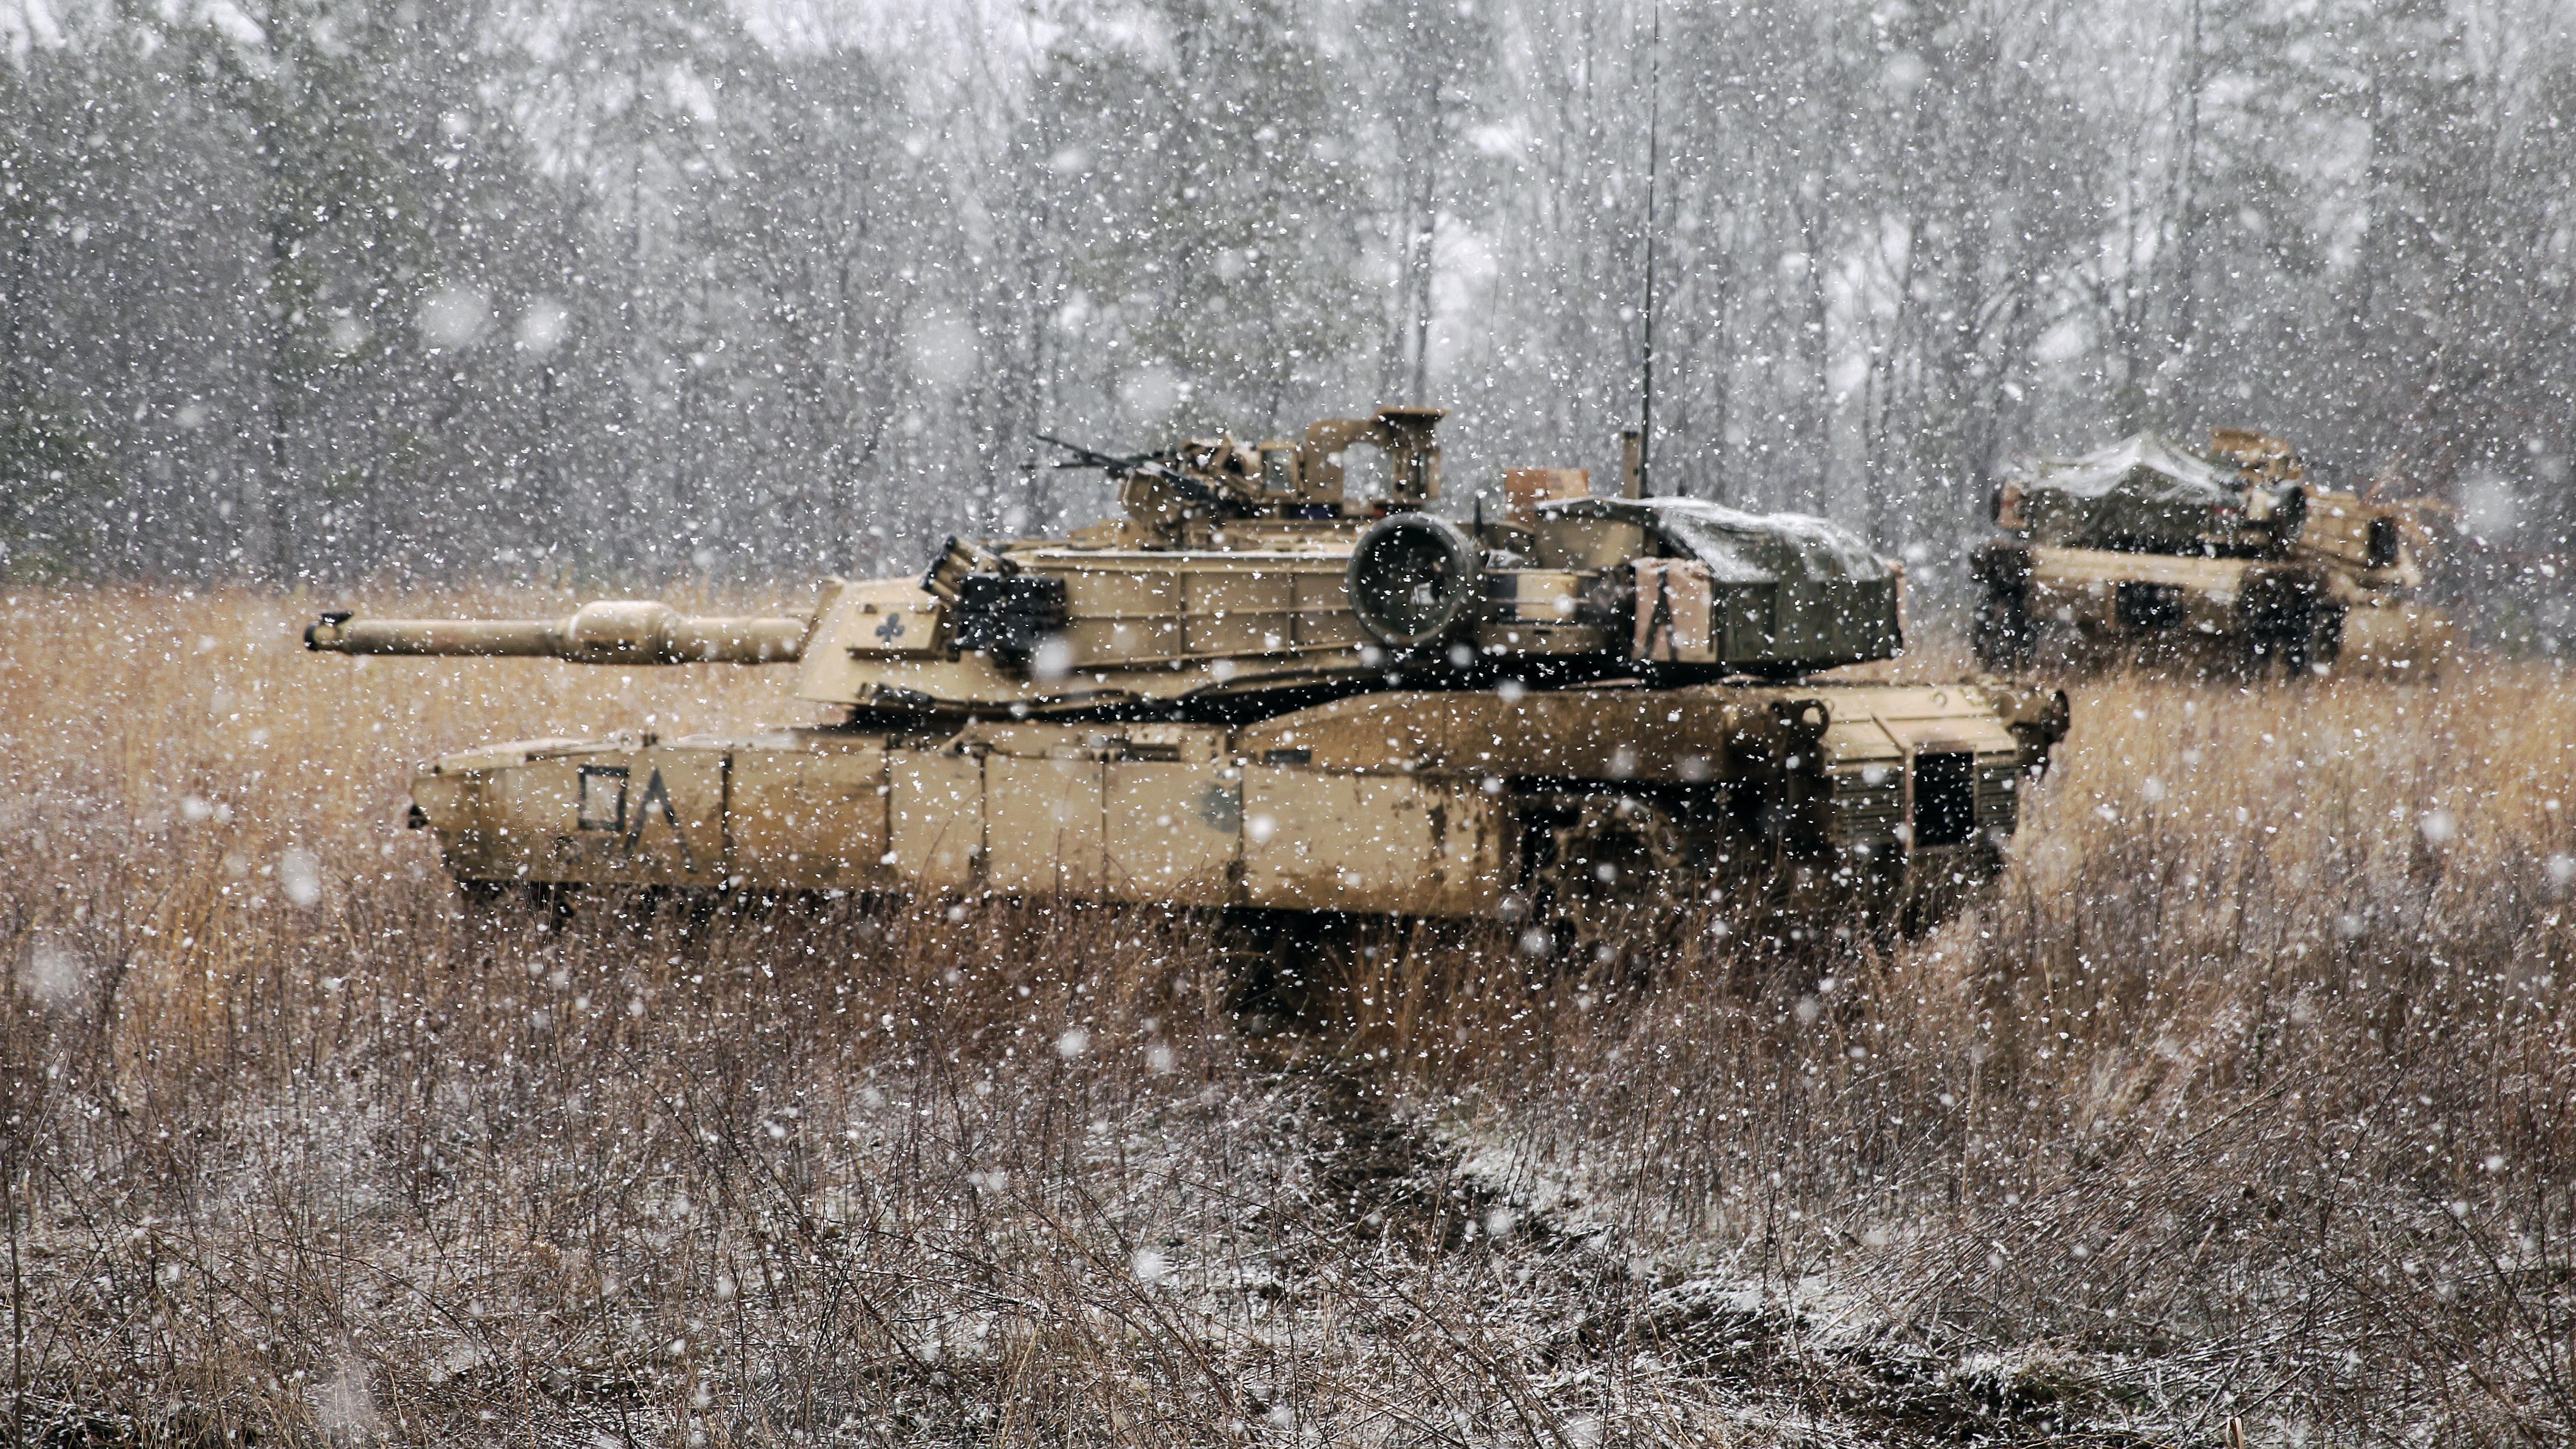 Allison Transmission Awarded a $51 Million Contract to Support Abrams Tank  Production for the U.S. Army and Internationally